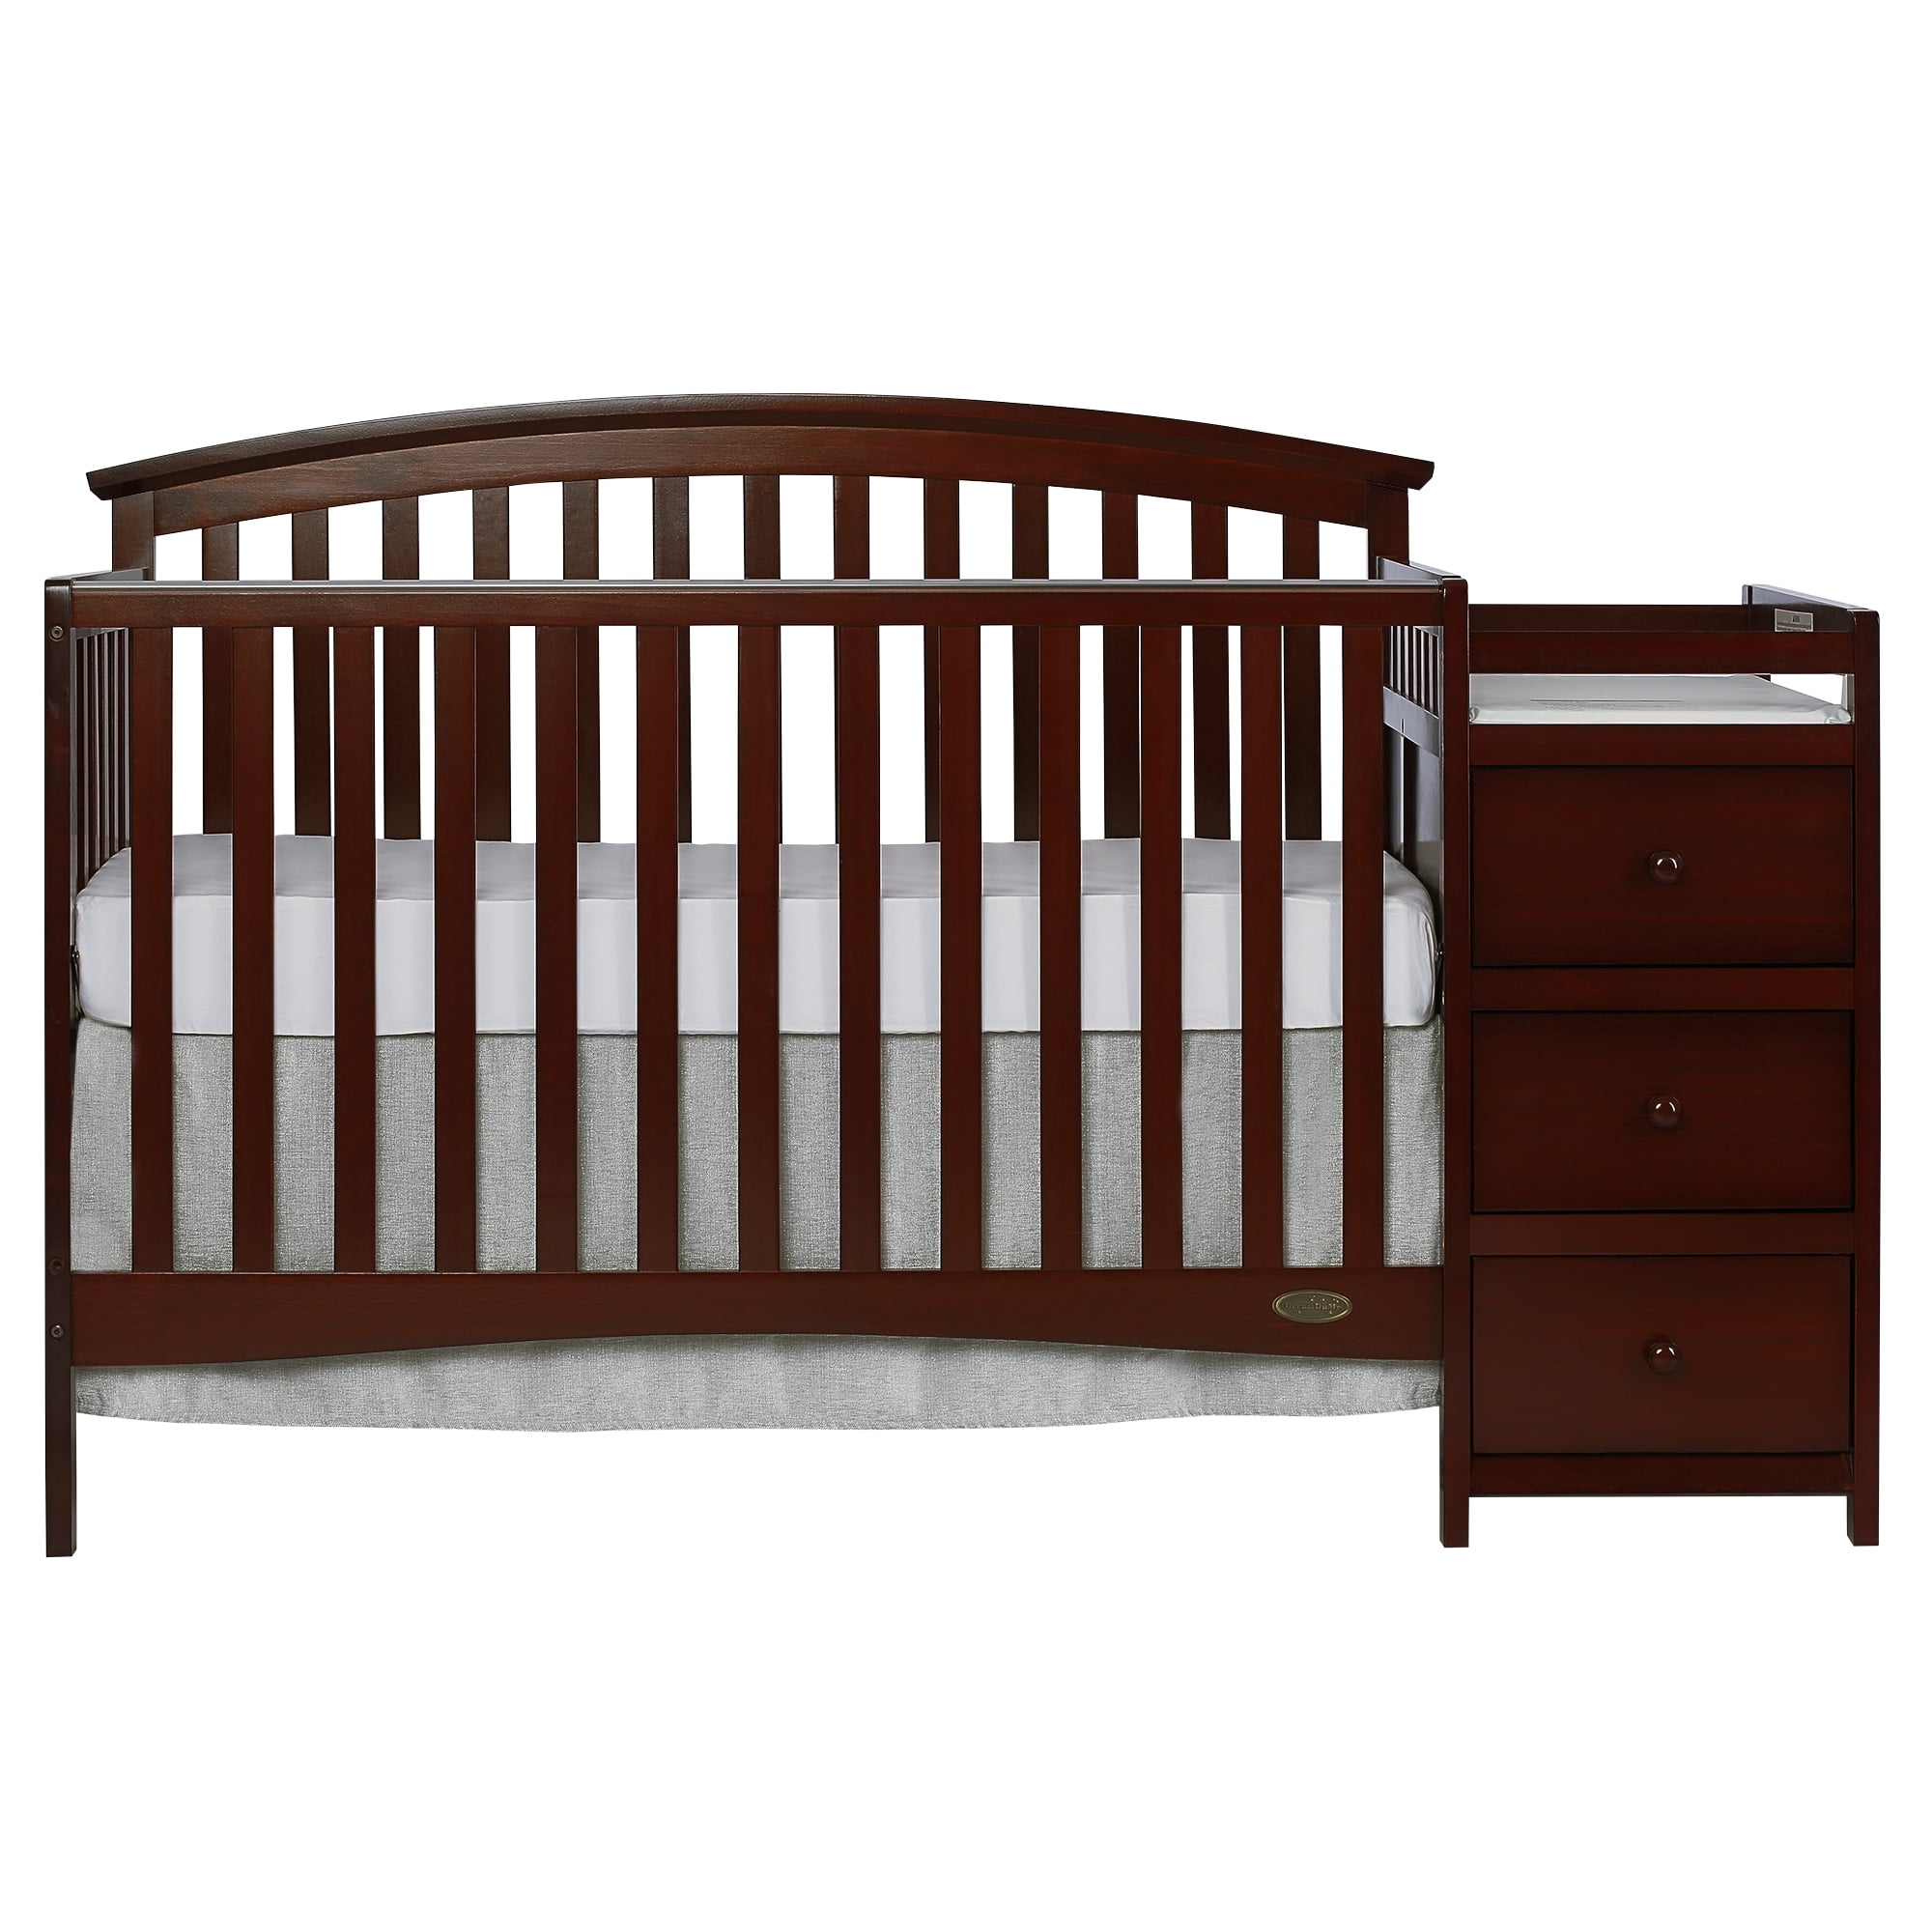 Photo 1 of Dream On Me Niko 5-in-1 Convertible Crib with Changer, Espresso (Box 1 of 2)